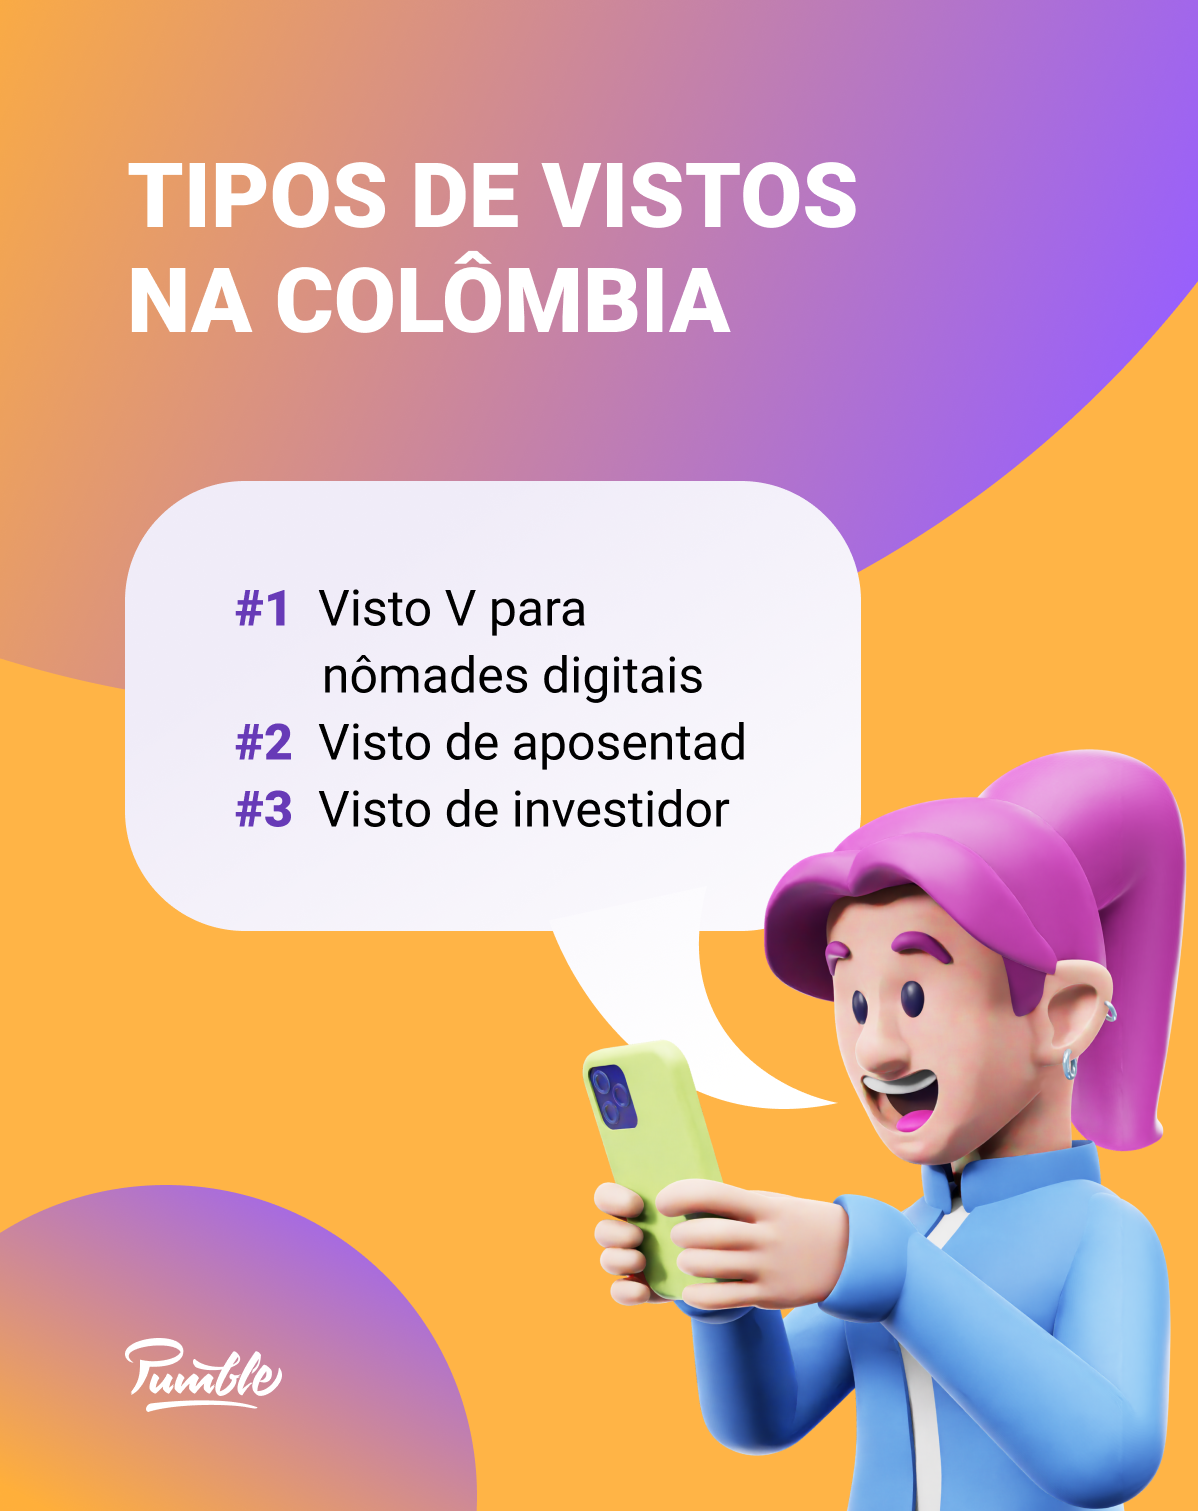  types of visas colombia